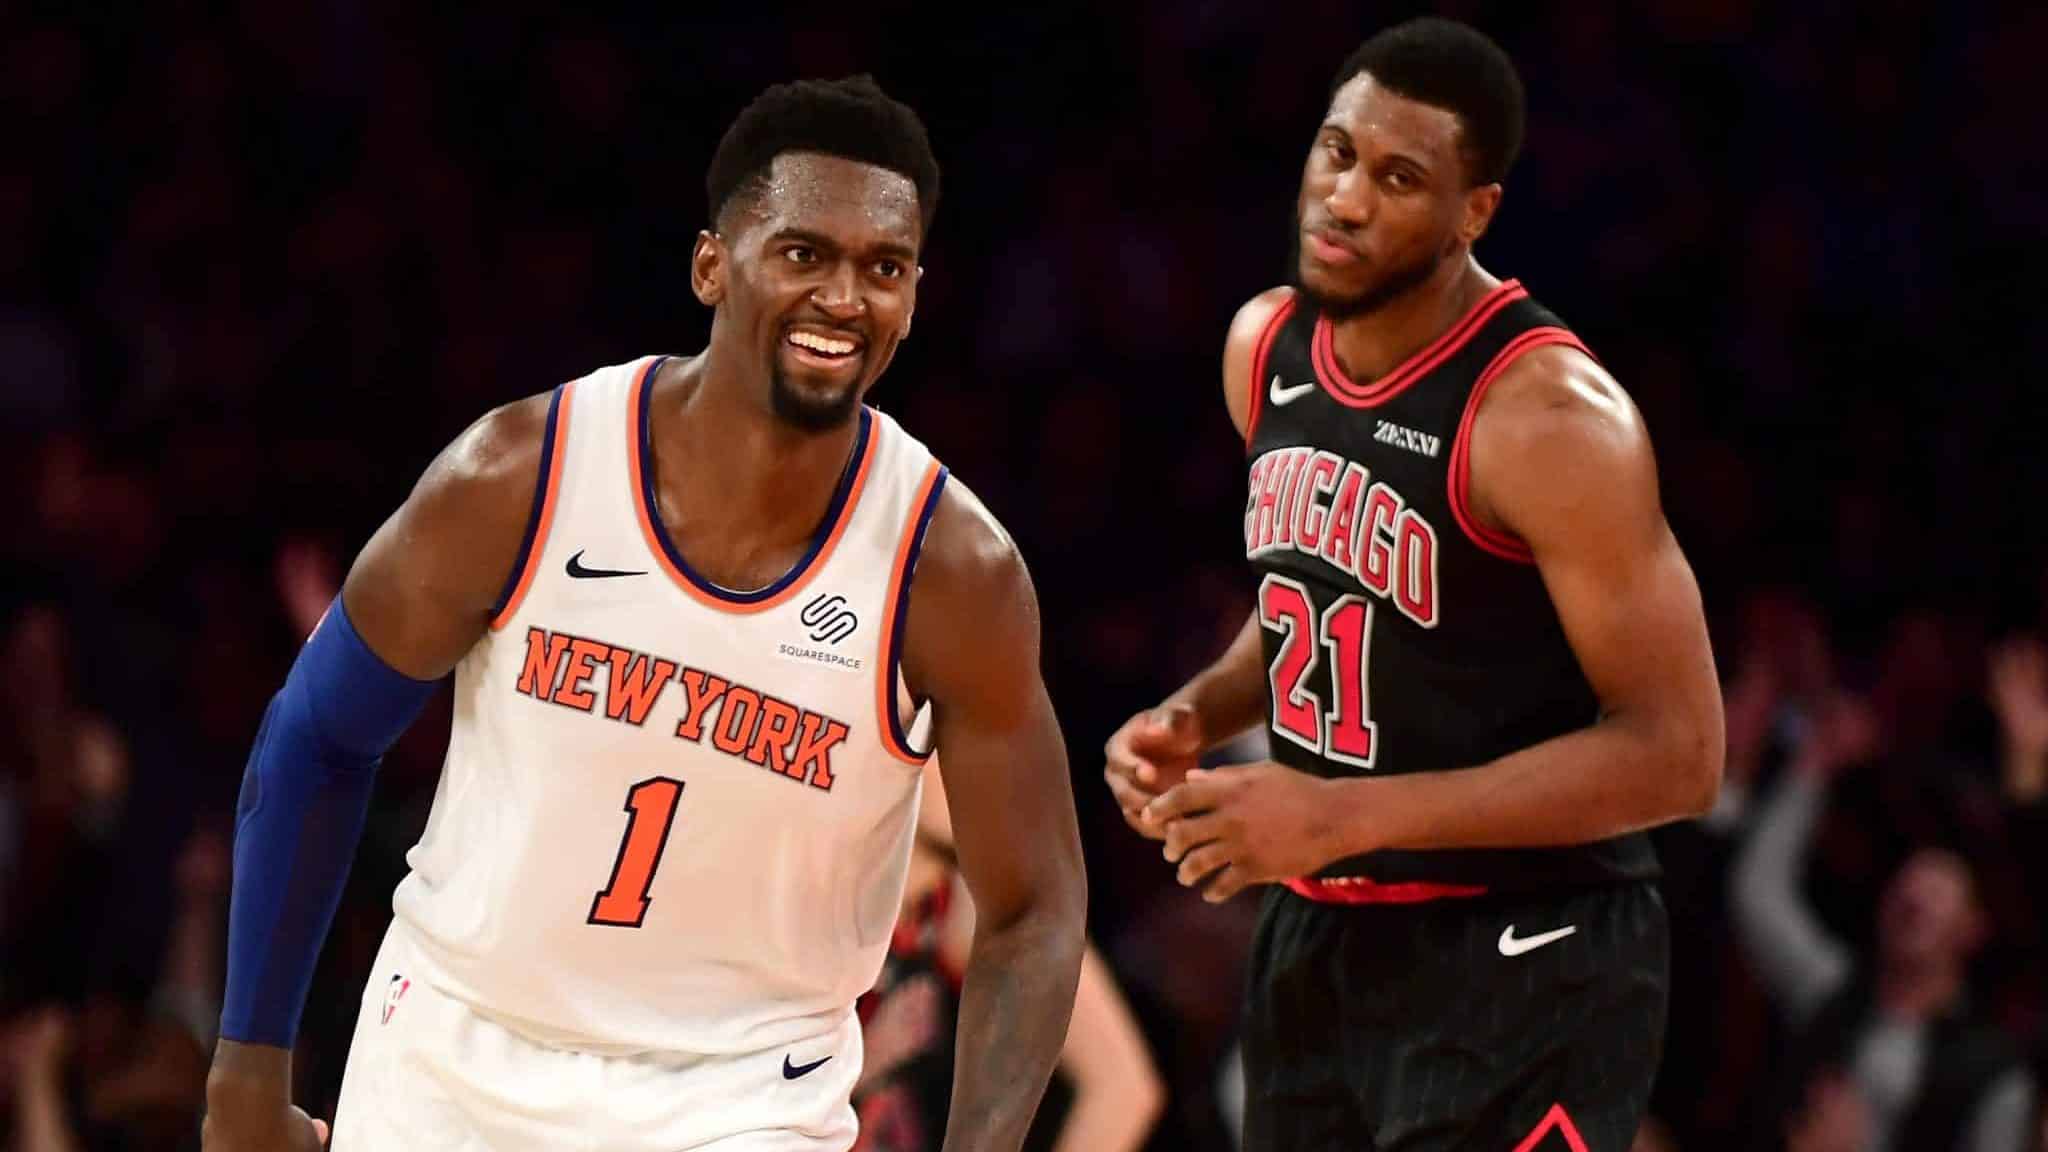 NEW YORK, NEW YORK - OCTOBER 28: Bobby Portis #1 of the New York Knicks reacts during second-half action against the Chicago Bulls at Madison Square Garden on October 28, 2019 in New York City. The Knicks won 105-98. NOTE TO USER: User expressly acknowledges and agrees that, by downloading and or using this Photograph, user is consenting to the terms and conditions of the Getty Images License Agreement.